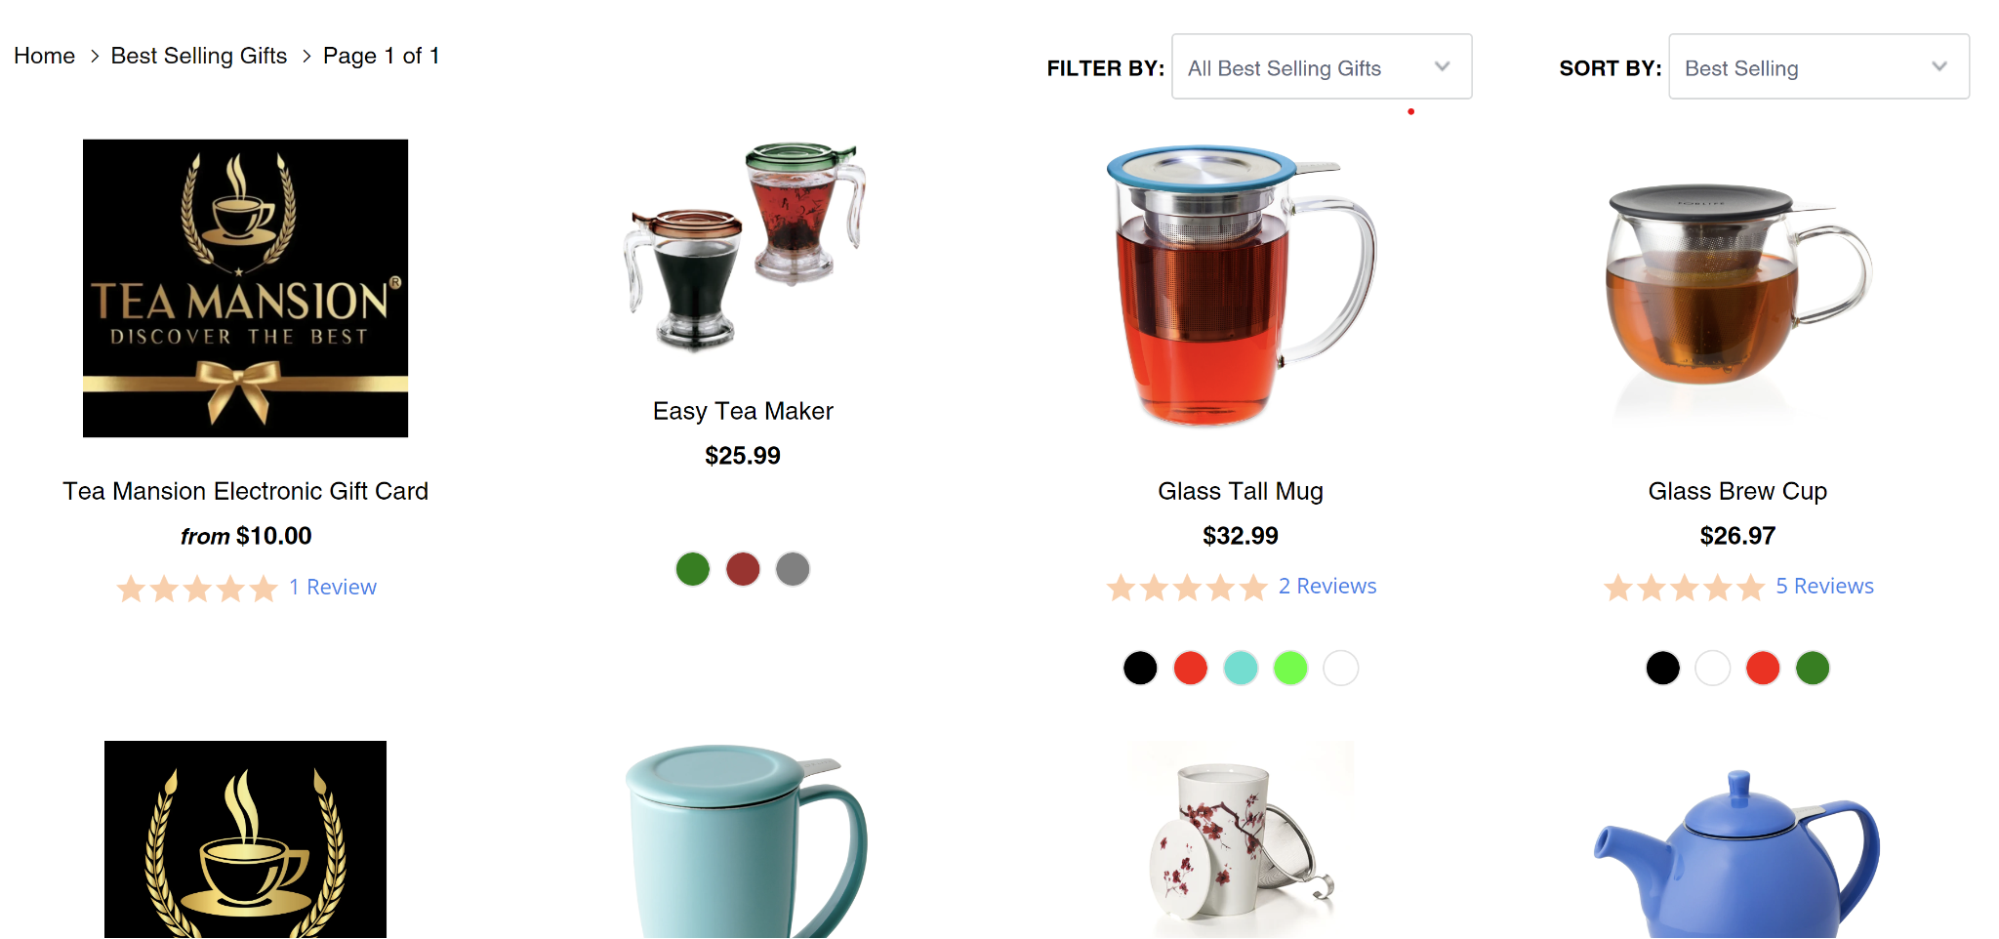 example of a holiday gift guide from Tea Mansion